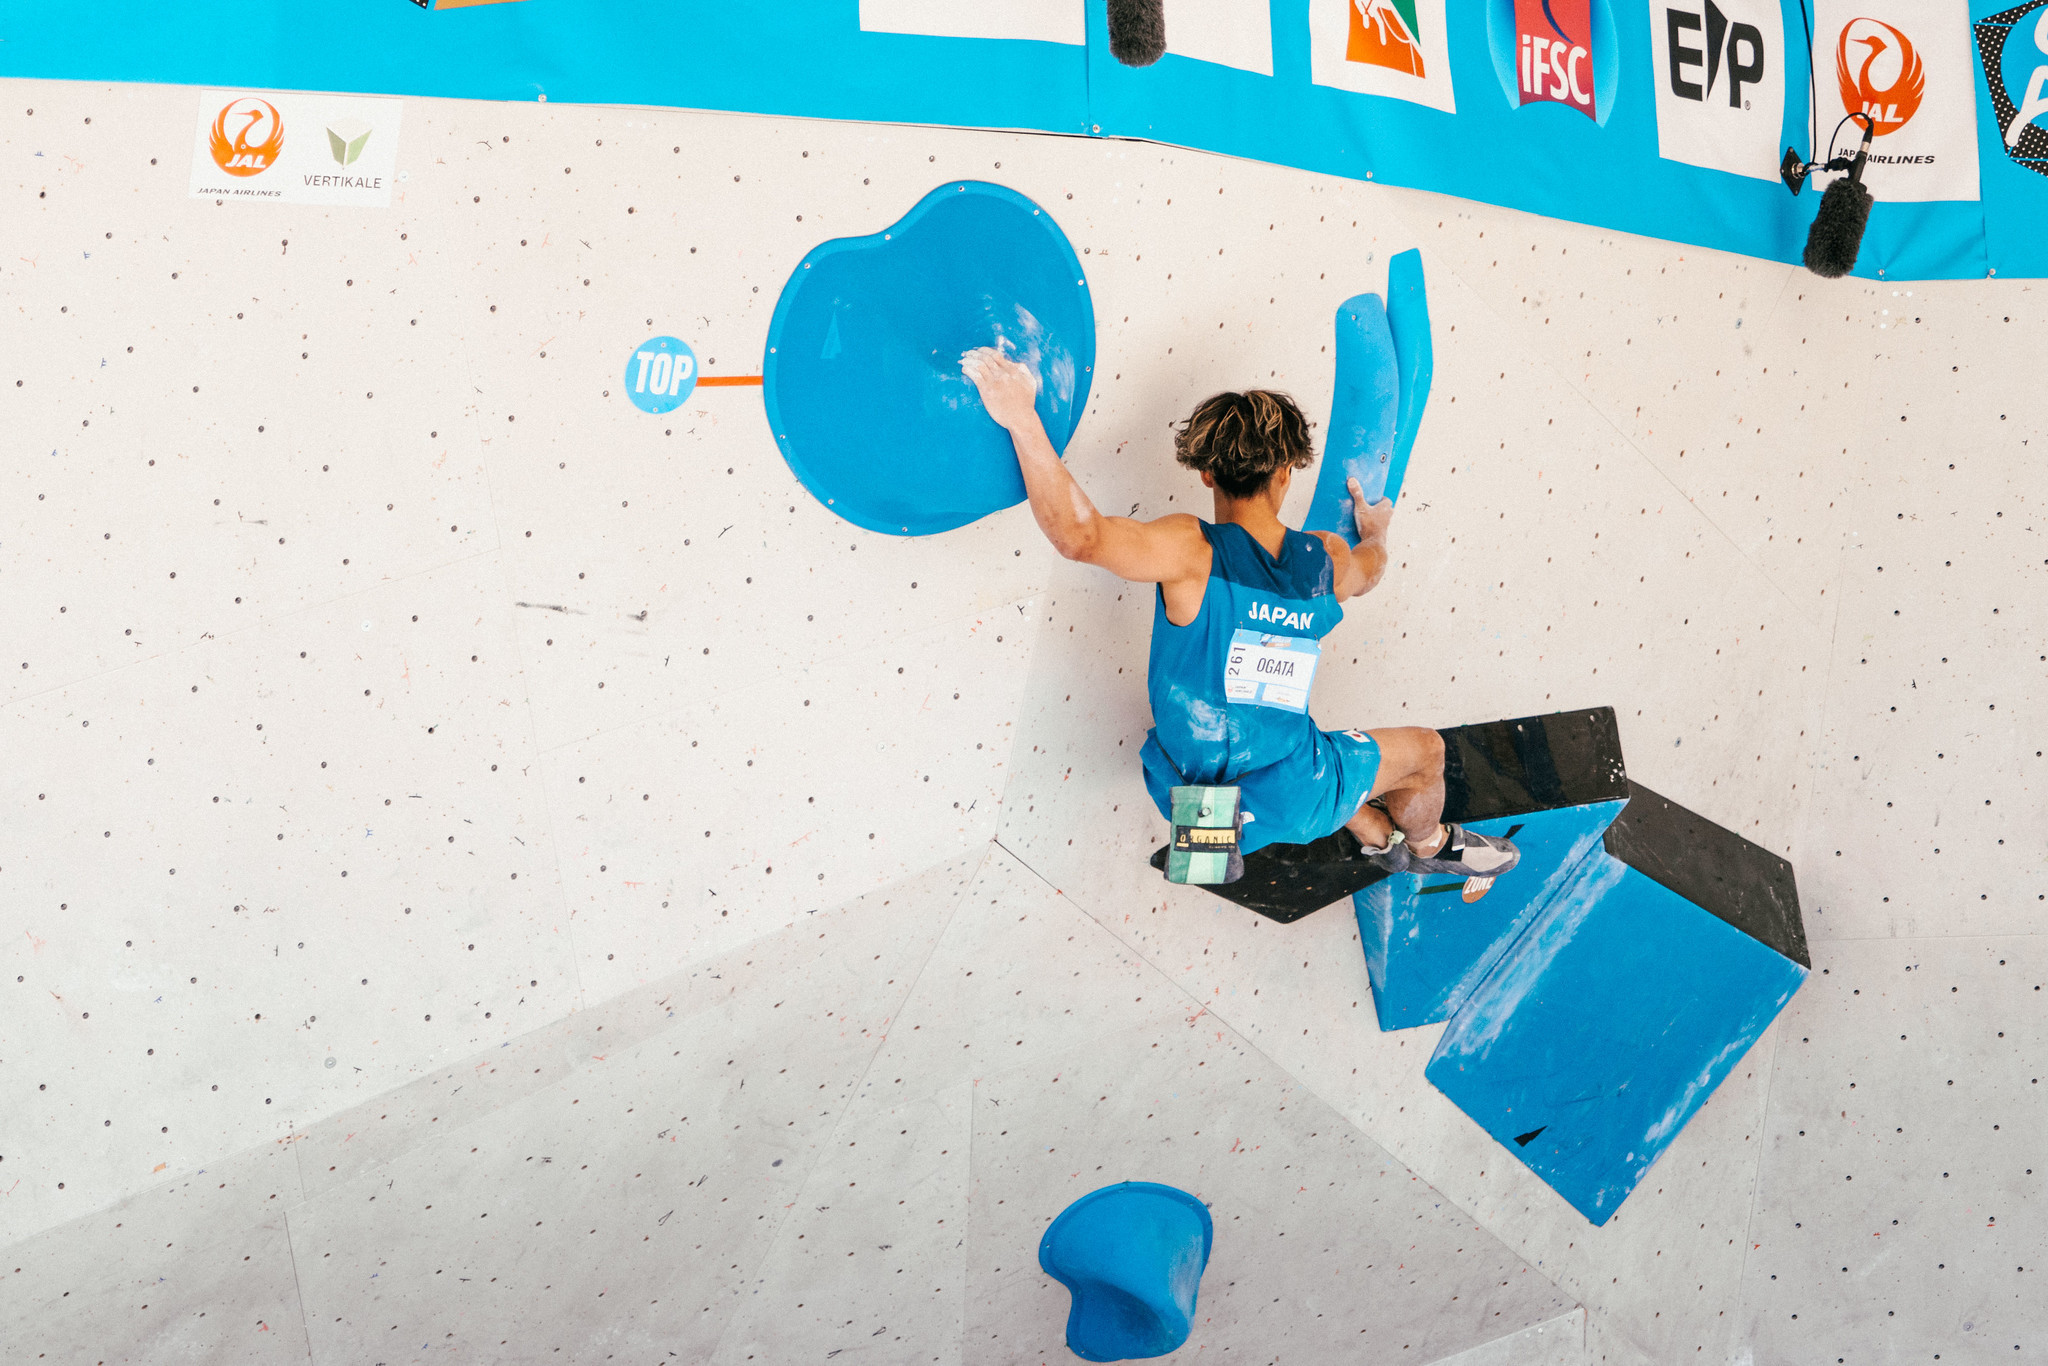 IFSC sets 2023 calendar including continental qualifiers for Olympics